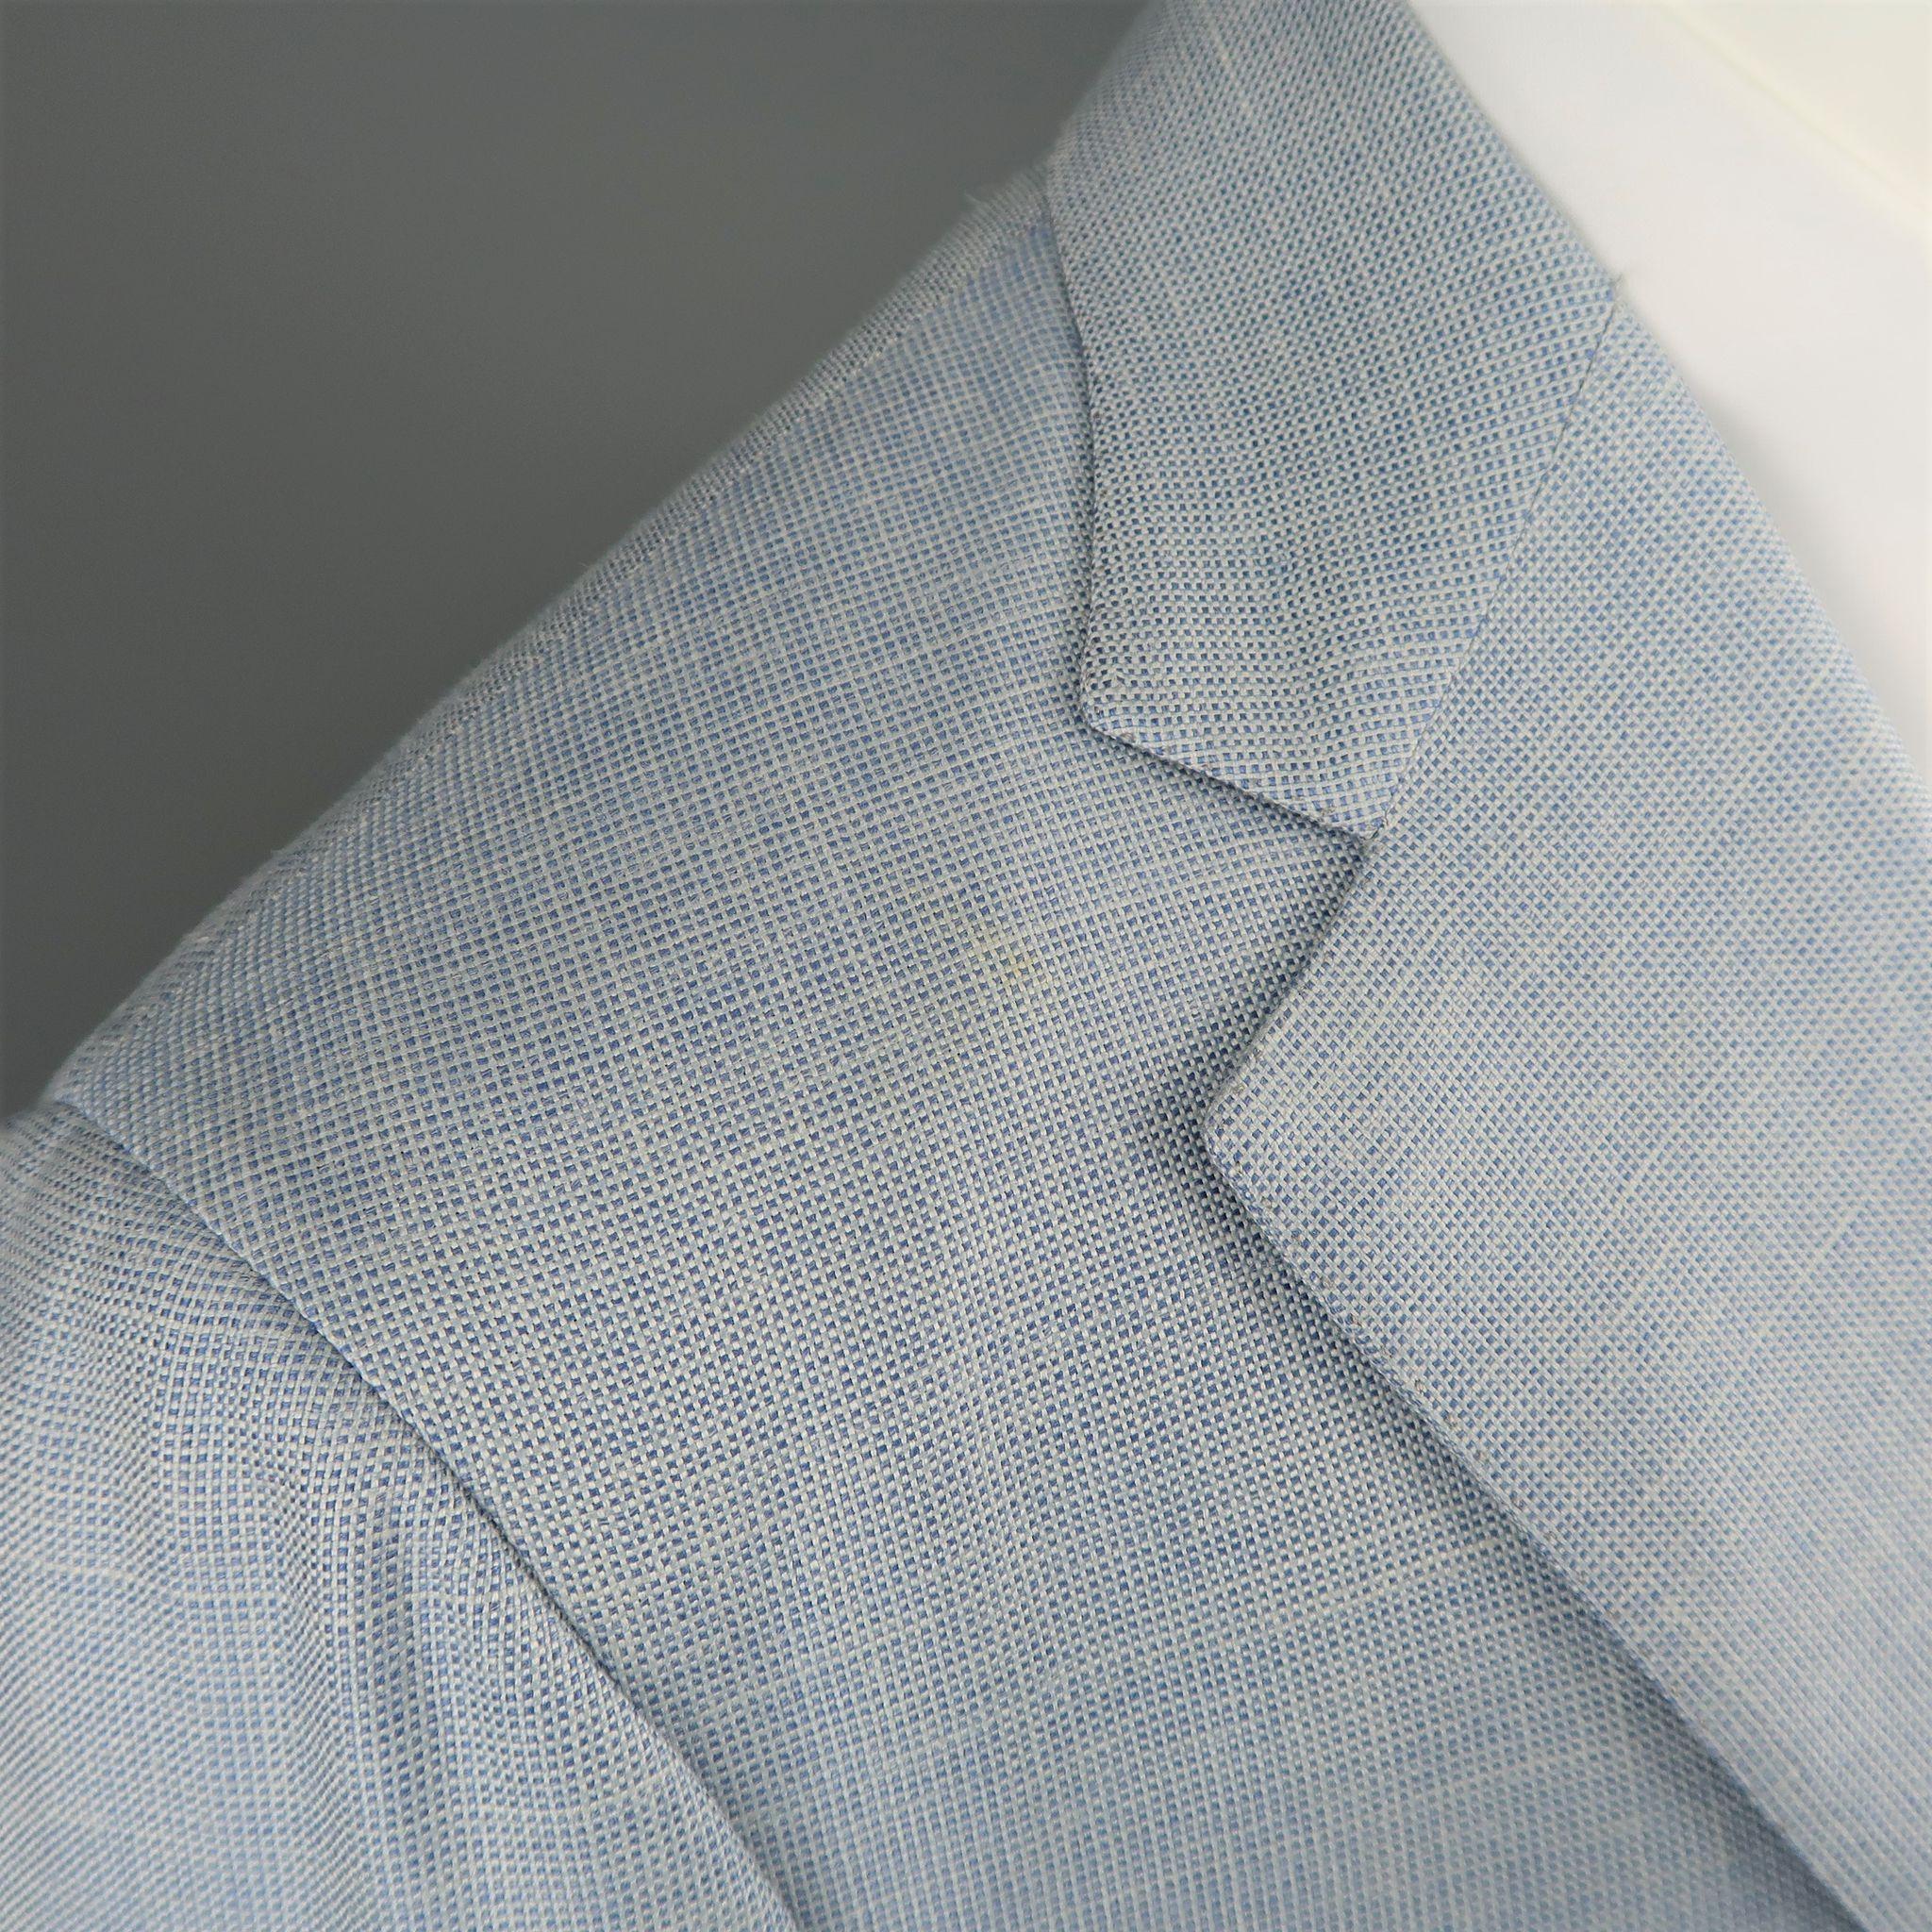 Vintage BRIONI sport coat comes in light blue textured wool blend with a notch lapel, two button front, and double vented back. Stain on shoulder. As-is. Made in Italy.
 
Fair Pre-Owned Condition.
Marked: 40
 
Measurements:
 
Shoulder: 17.5